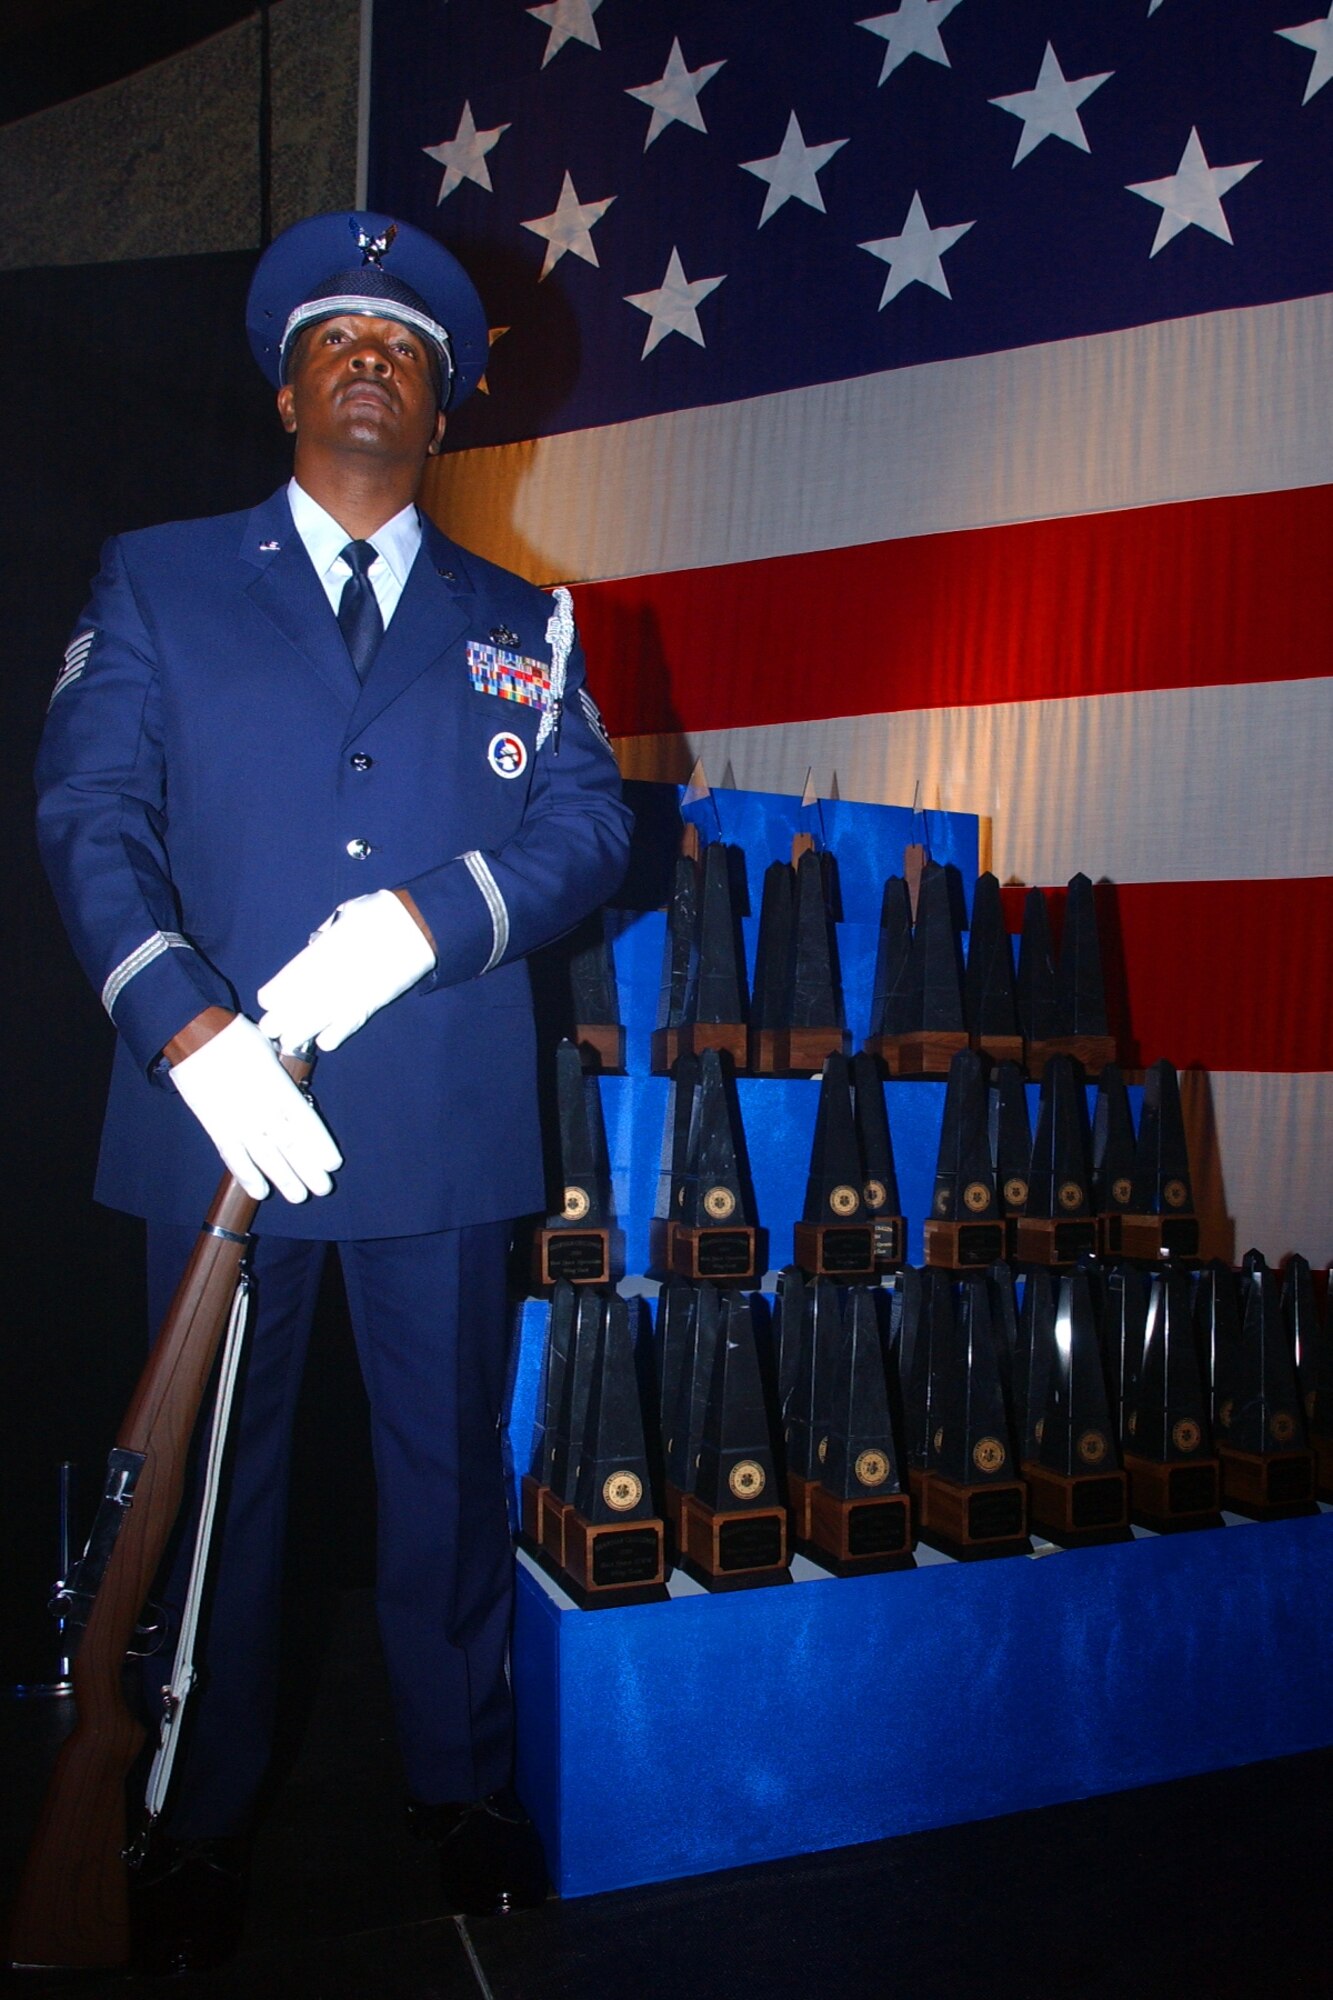 Tech. Sgt. Andrew Fulbright, Front Range Honor Guard ceremonial trainer, stands guard of the Guardian Challenge 2006 trophies, Aug. 17. The 341st Space Wing from Malmstrom Air Force Base, Mont., won the Blanchard Trophy for Best Intercontinental Ballistic Missile Space Wing. The 45th SW from Patrick AFB, Fla., won the Schriever Trophy for Best Space Launch Wing. The 21st SW from Peterson AFB, Colo., won the Aldridge Trophy for Best Space Operations Wing. (Air Force photo by Duncan Wood) 